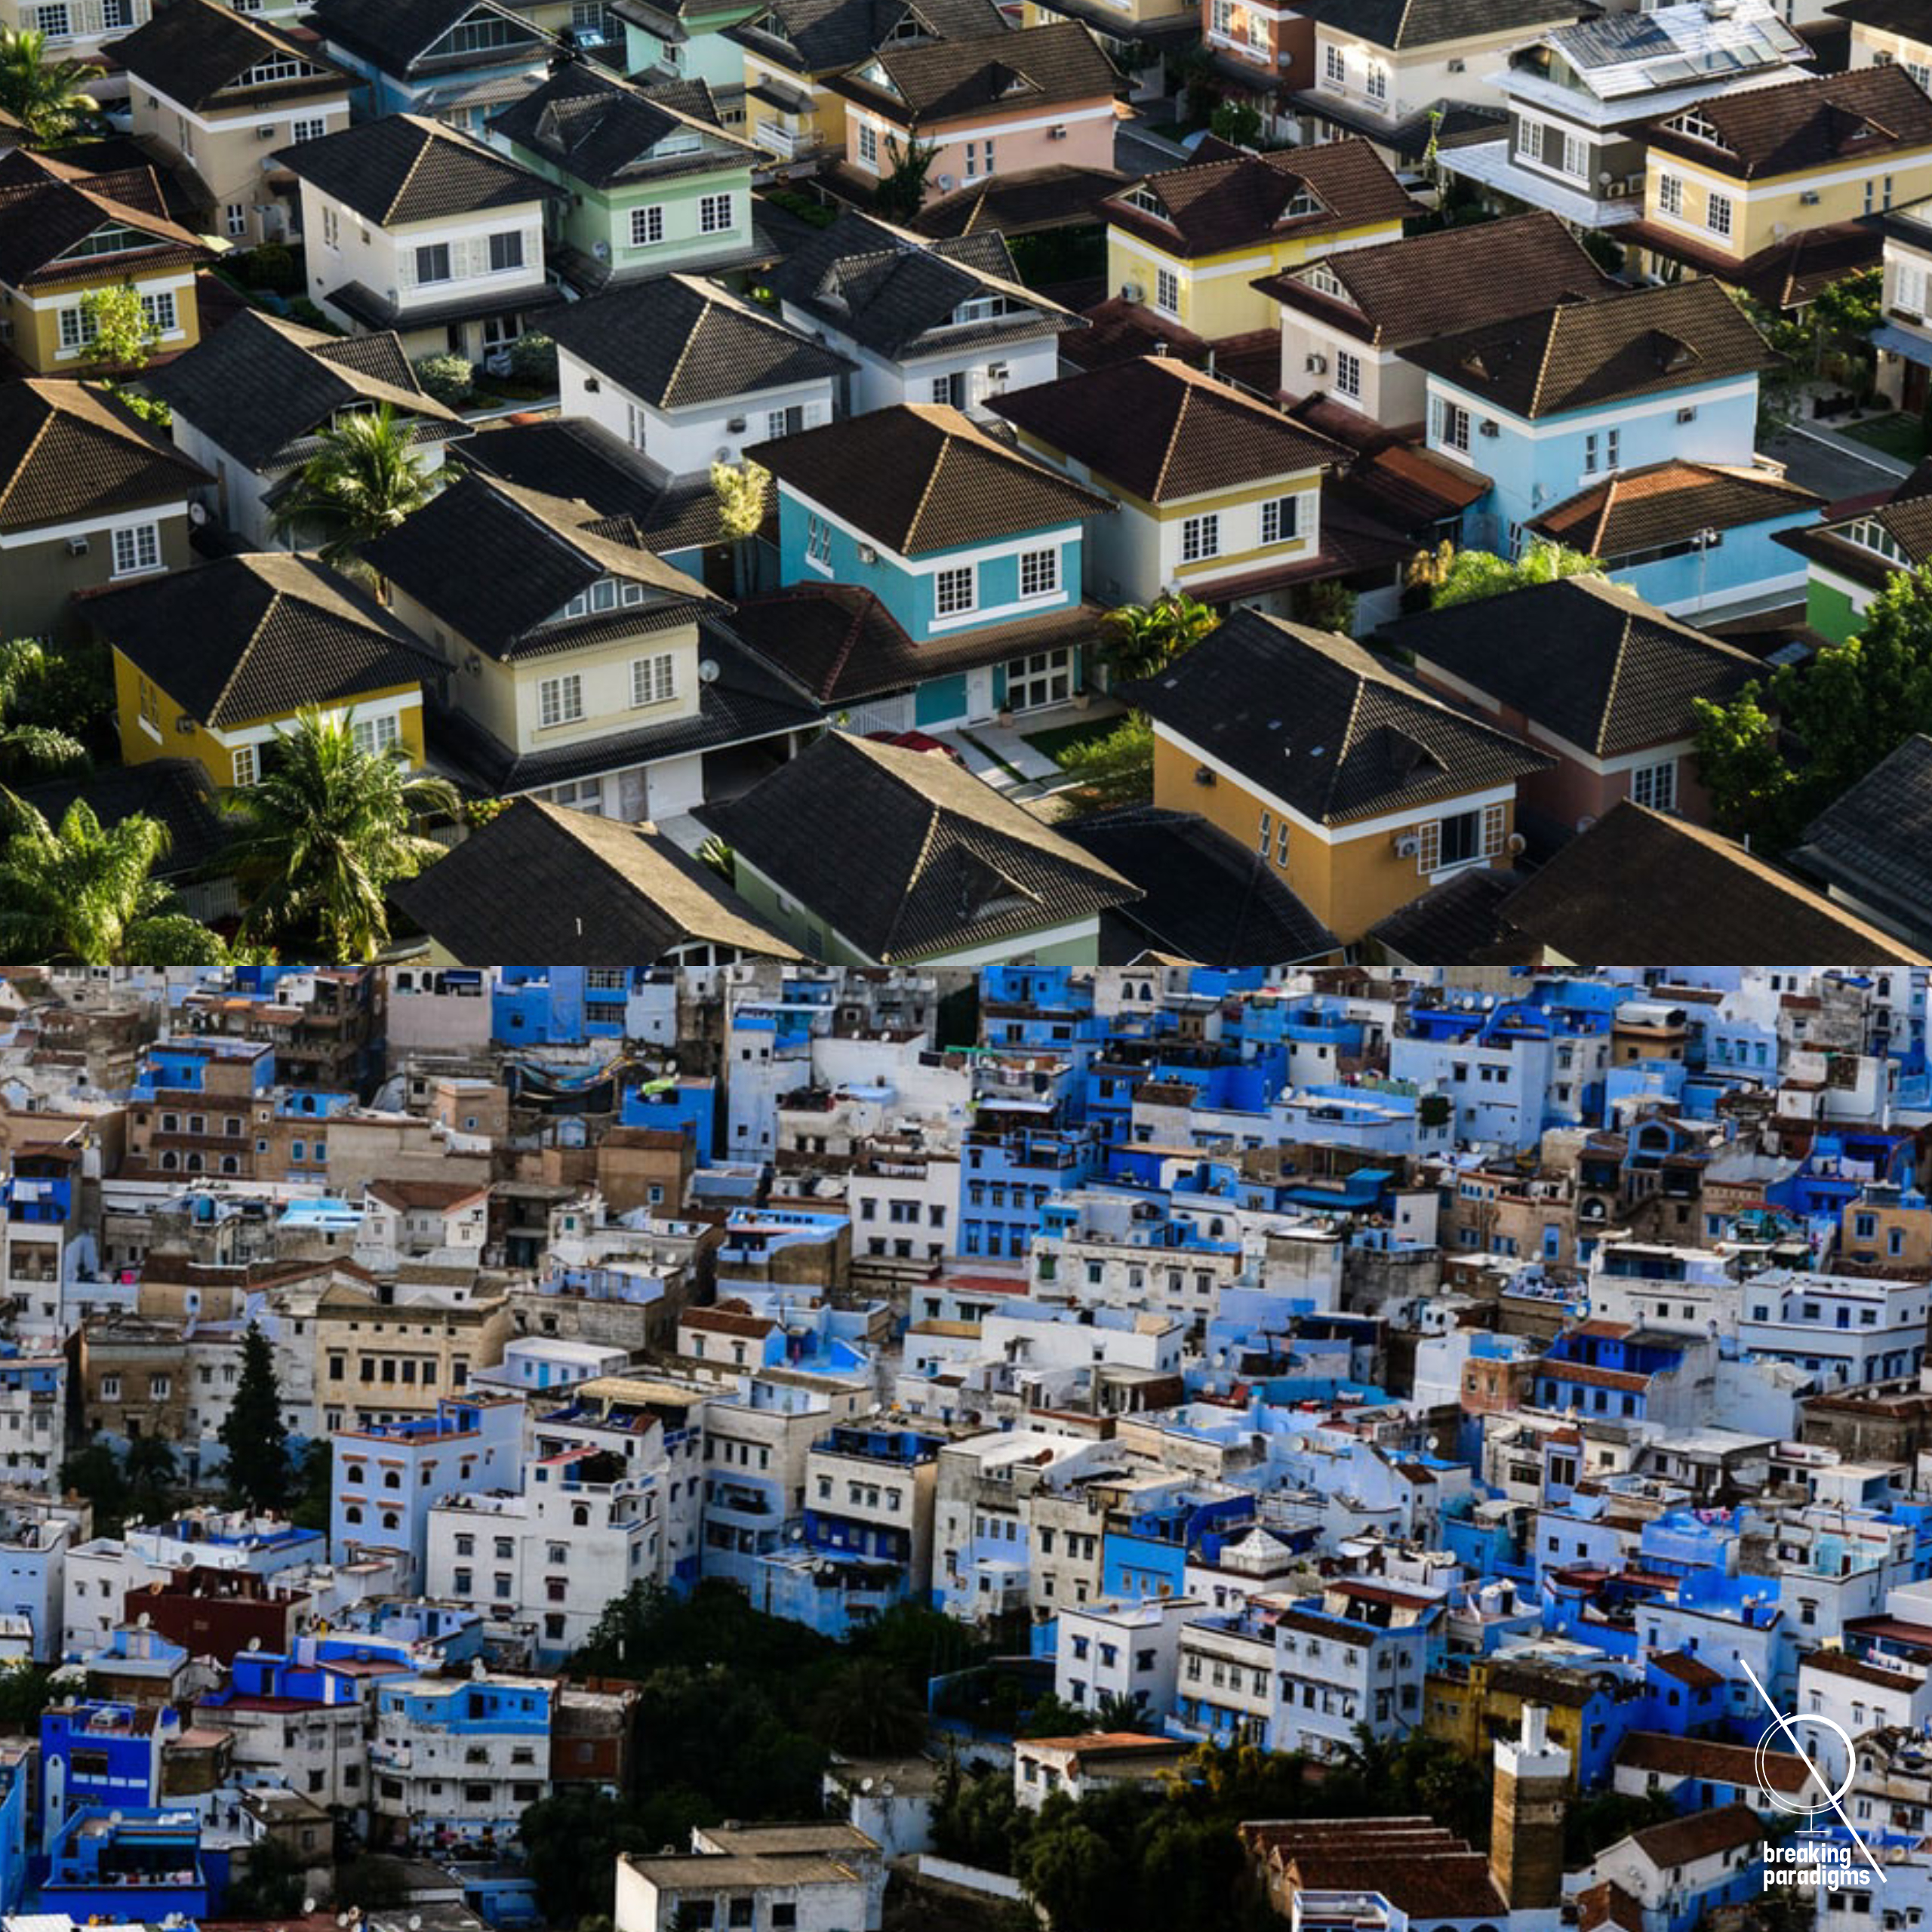 Informal and formal settlements in two pictures